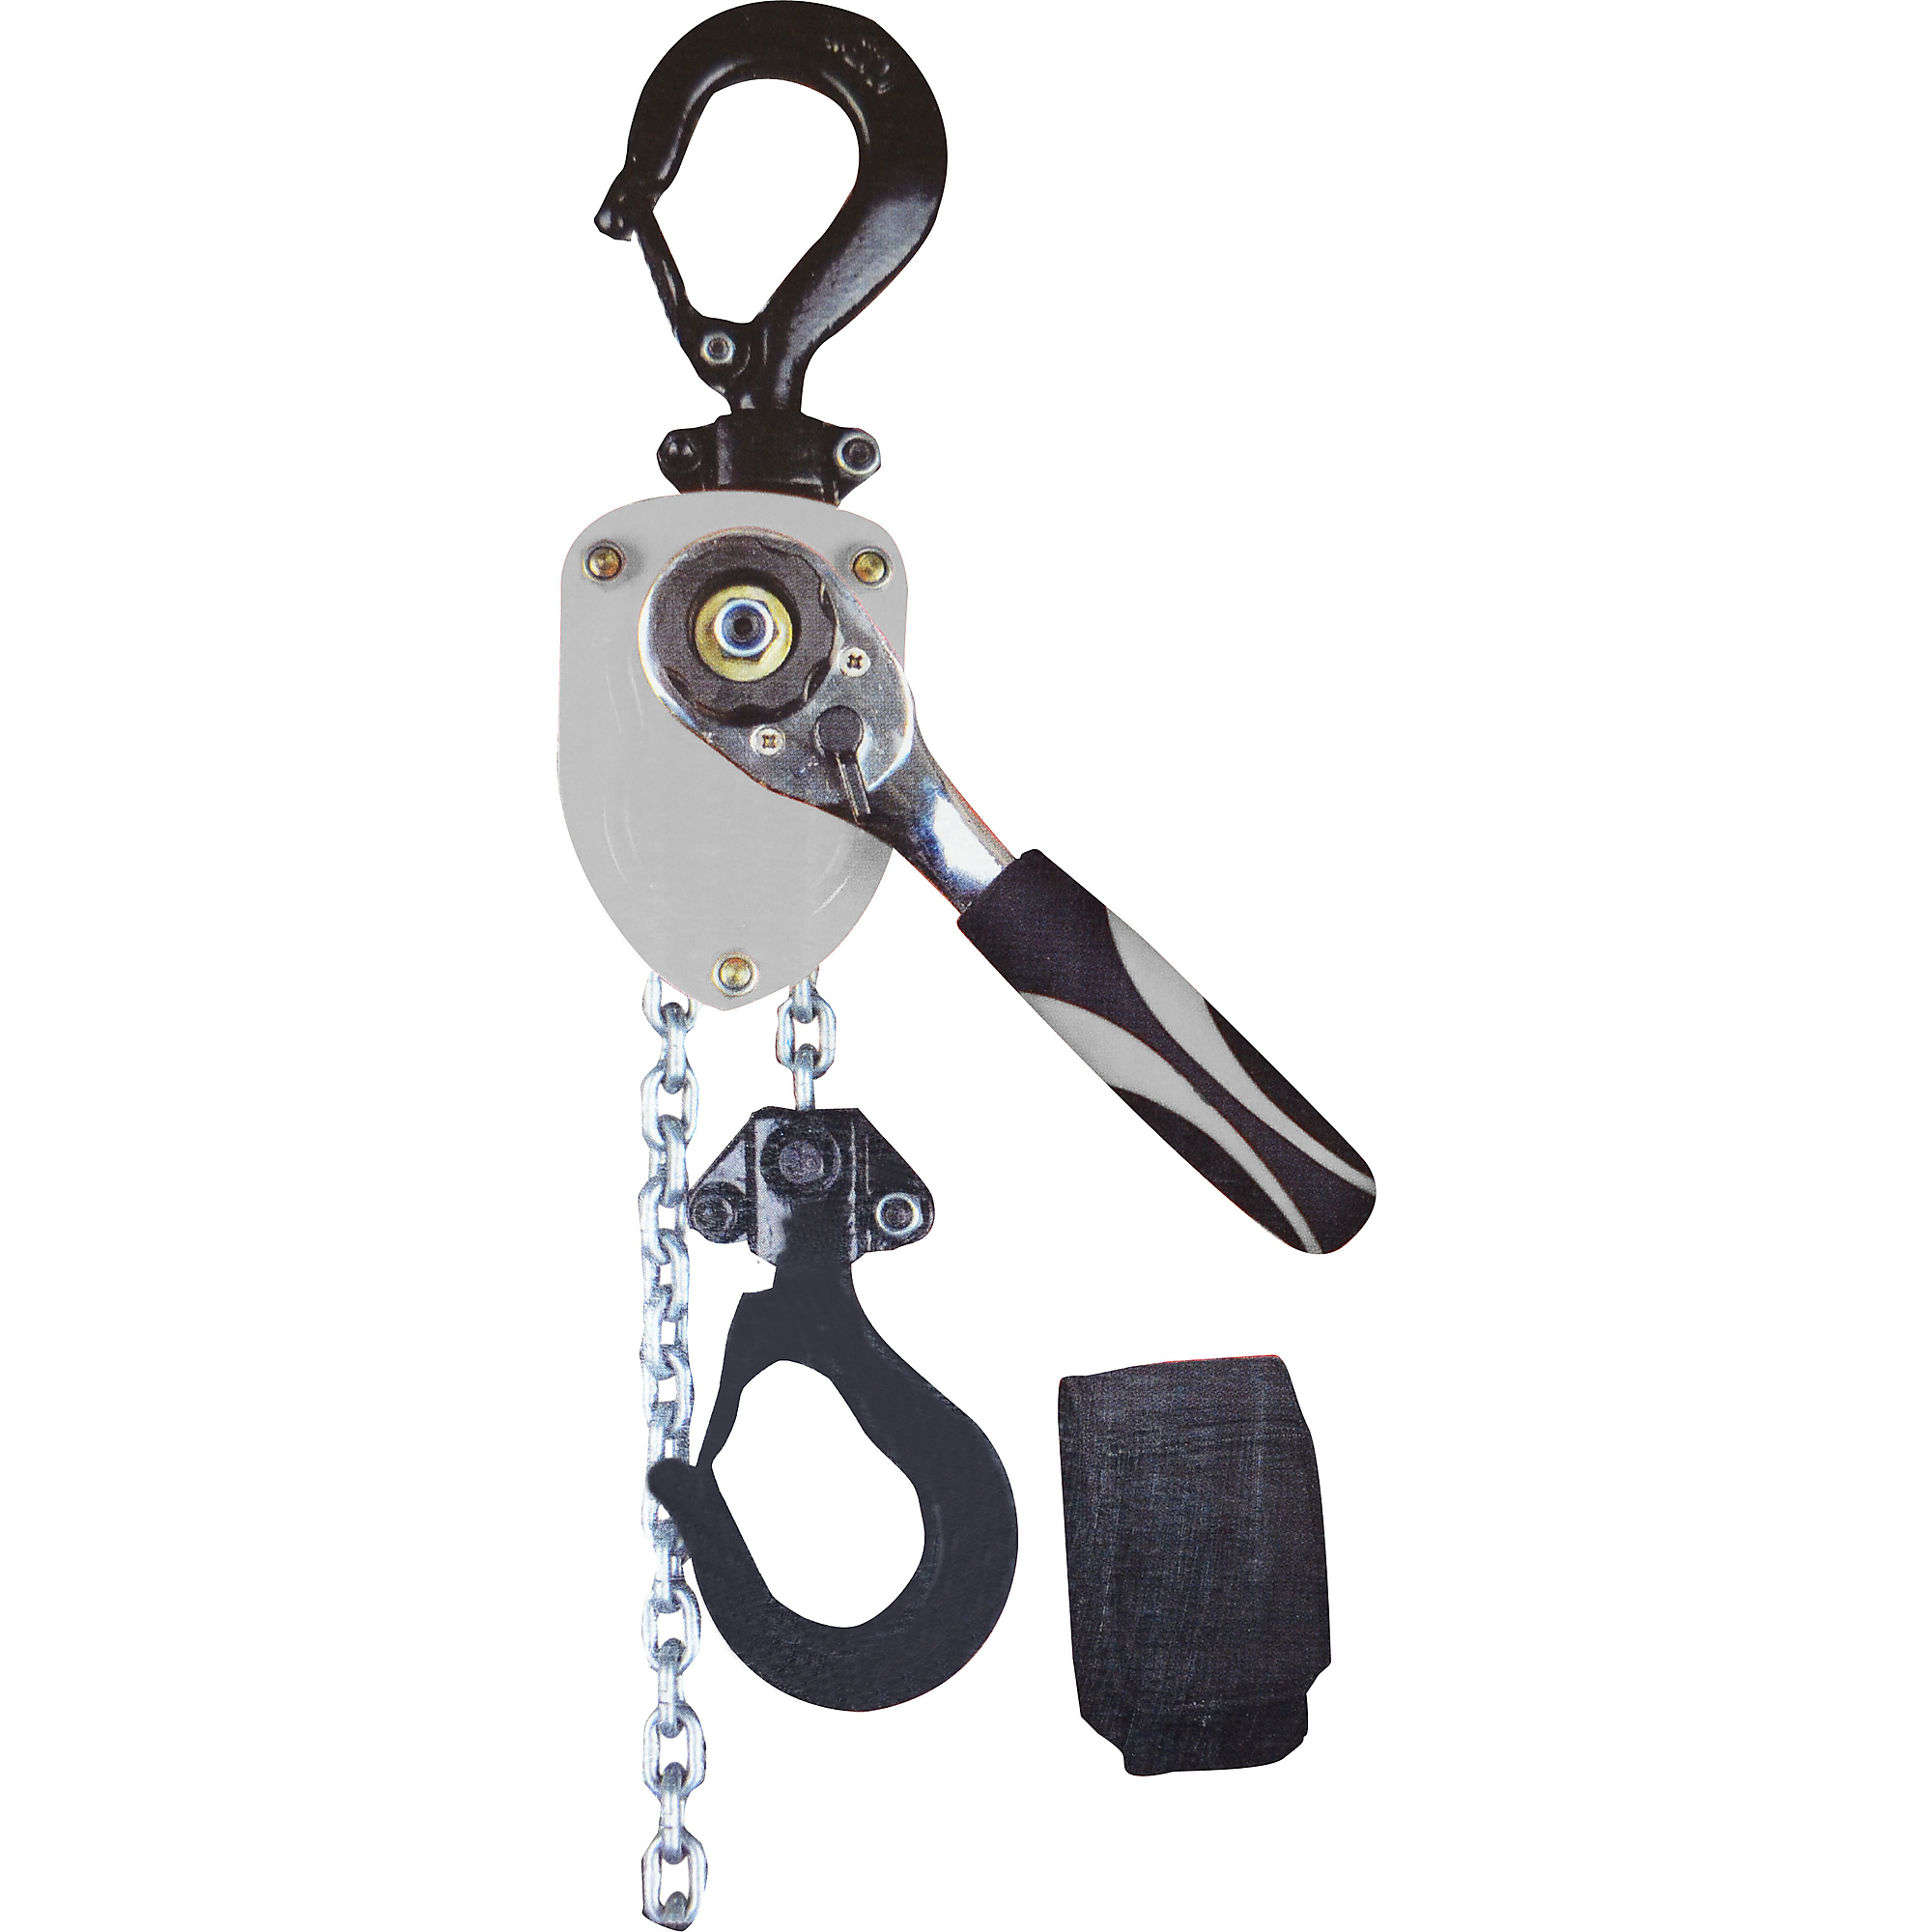 Manual Chain Hoist, Power Source Manual Lever, Capacity 1000 lb, Lift Height 10 ft, Model - Shop Tuff STF-1010LH